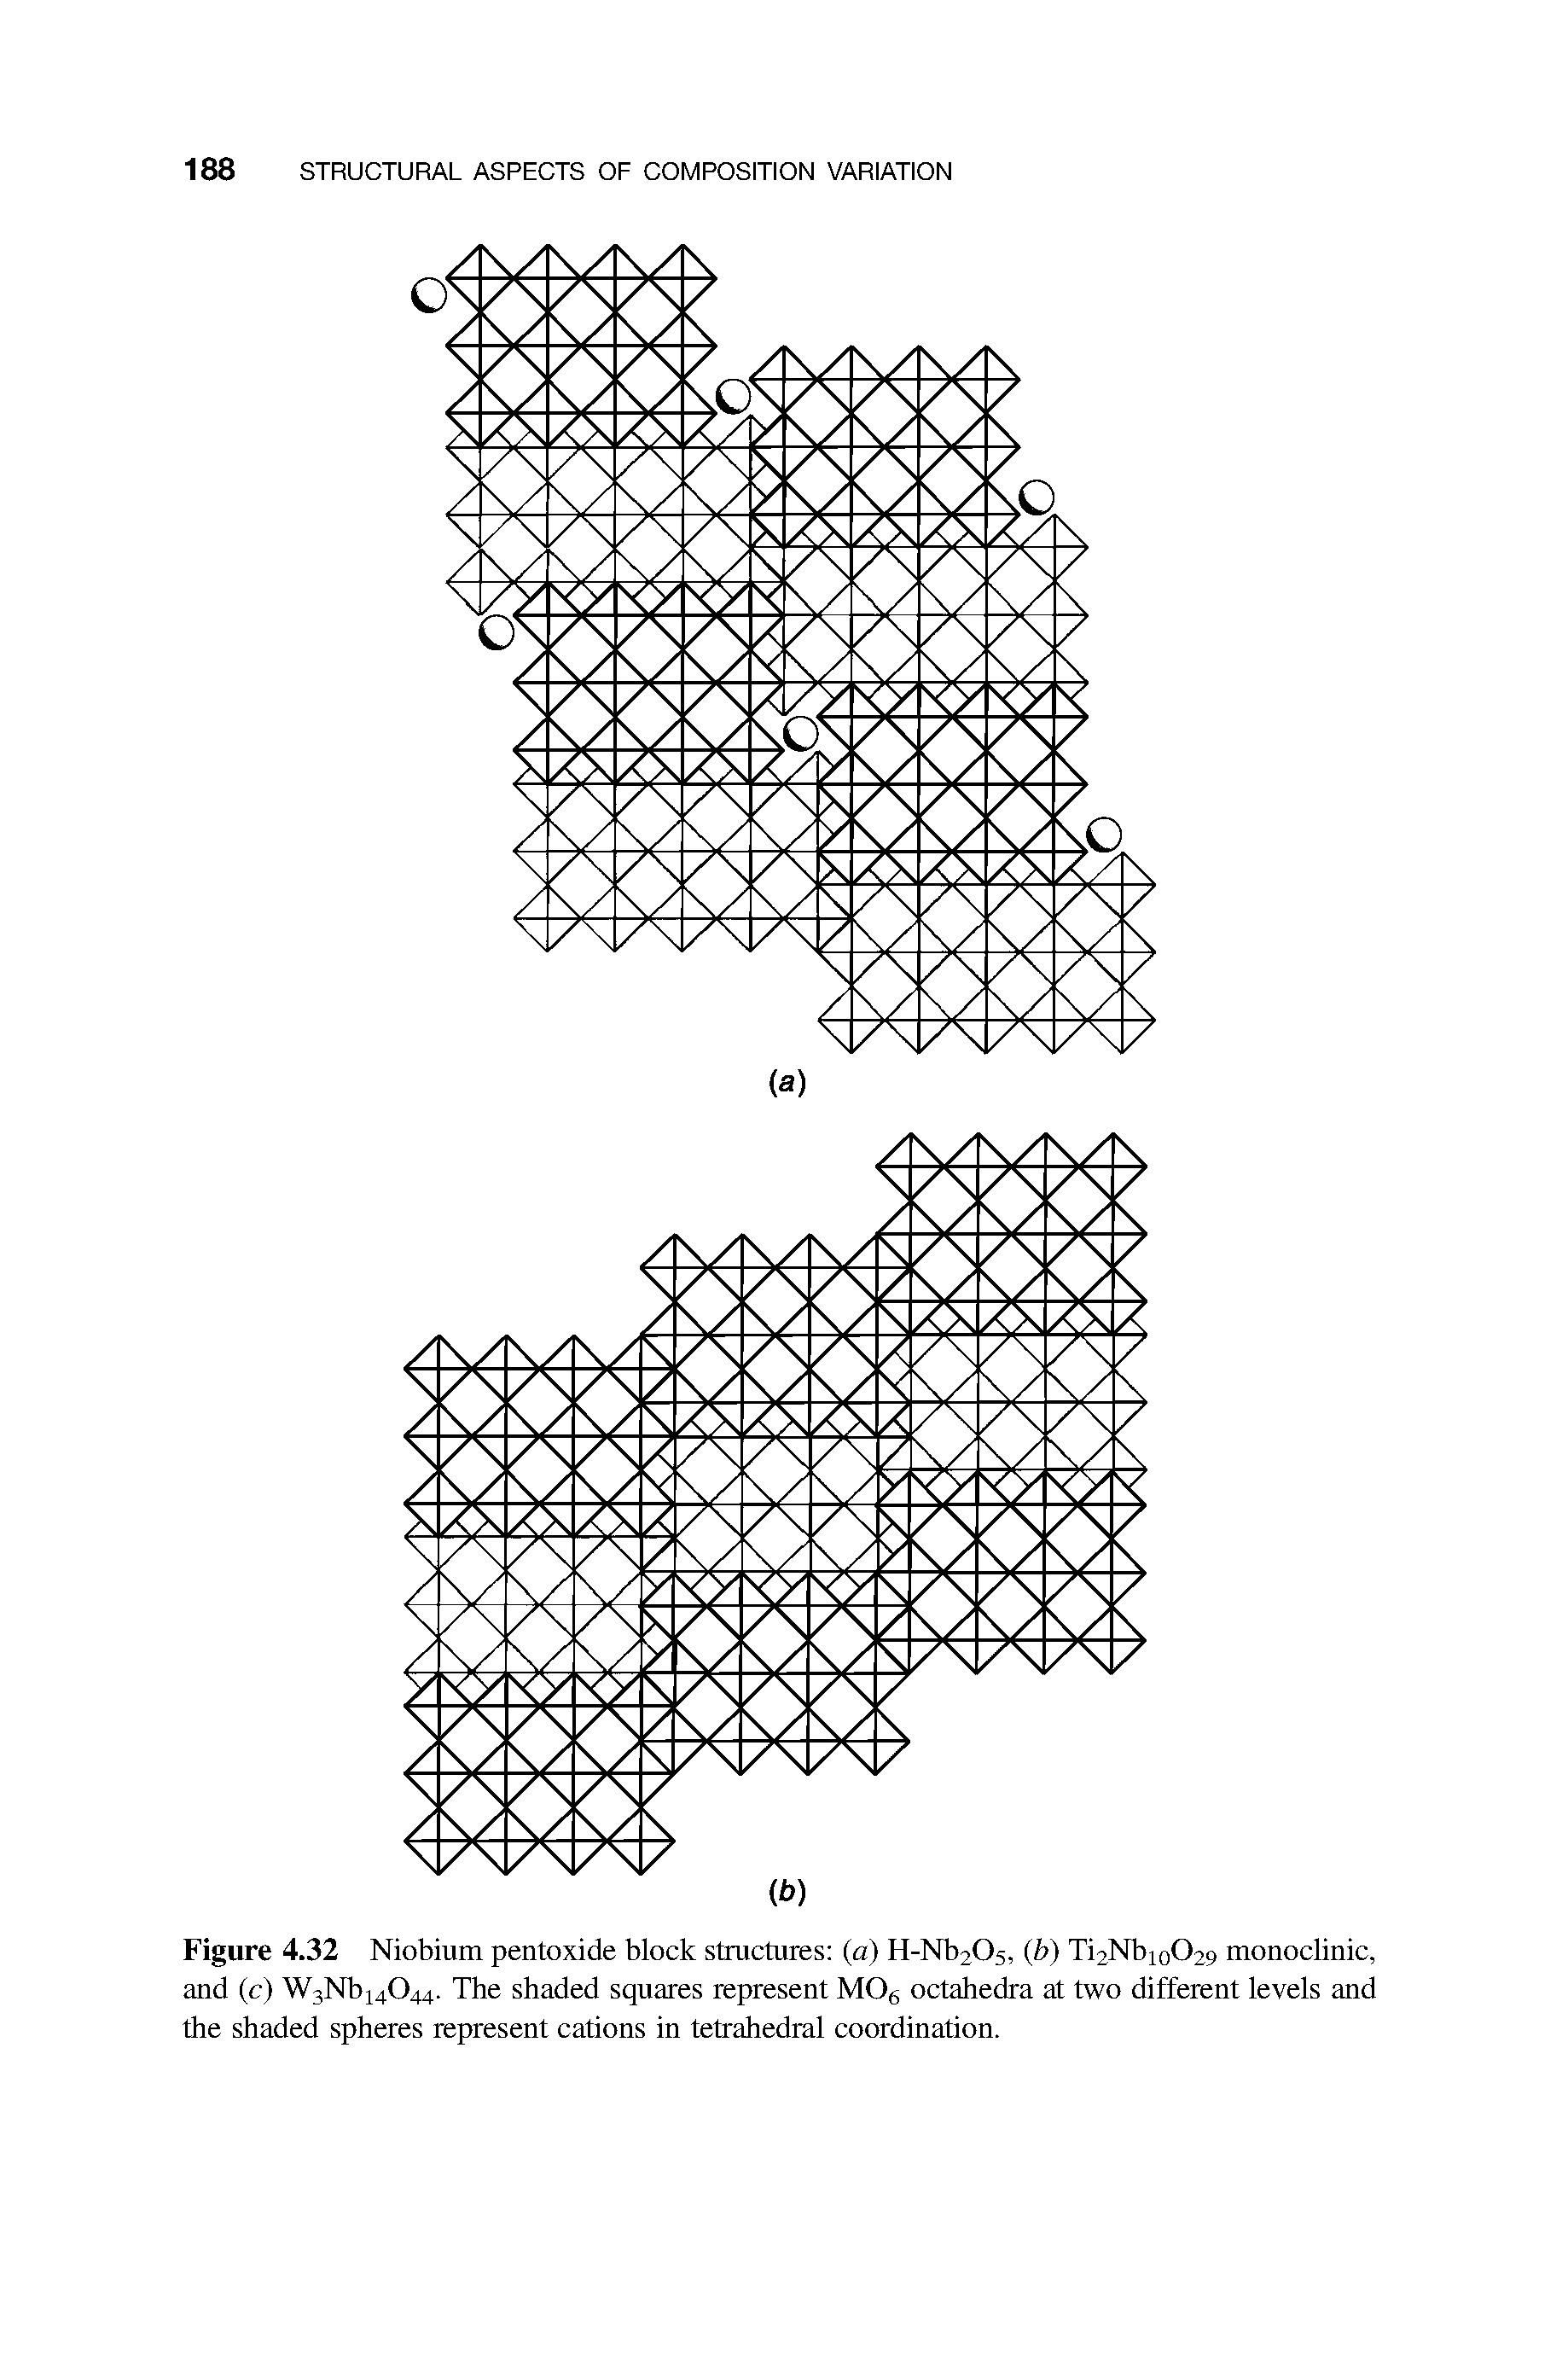 Figure 4.32 Niobium pentoxide block structures (a) H-Nb2Os, (b) Ti2Nb10O29 monoclinic, and (c) W3Nb14044. The shaded squares represent MOg octahedra at two different levels and the shaded spheres represent cations in tetrahedral coordination.